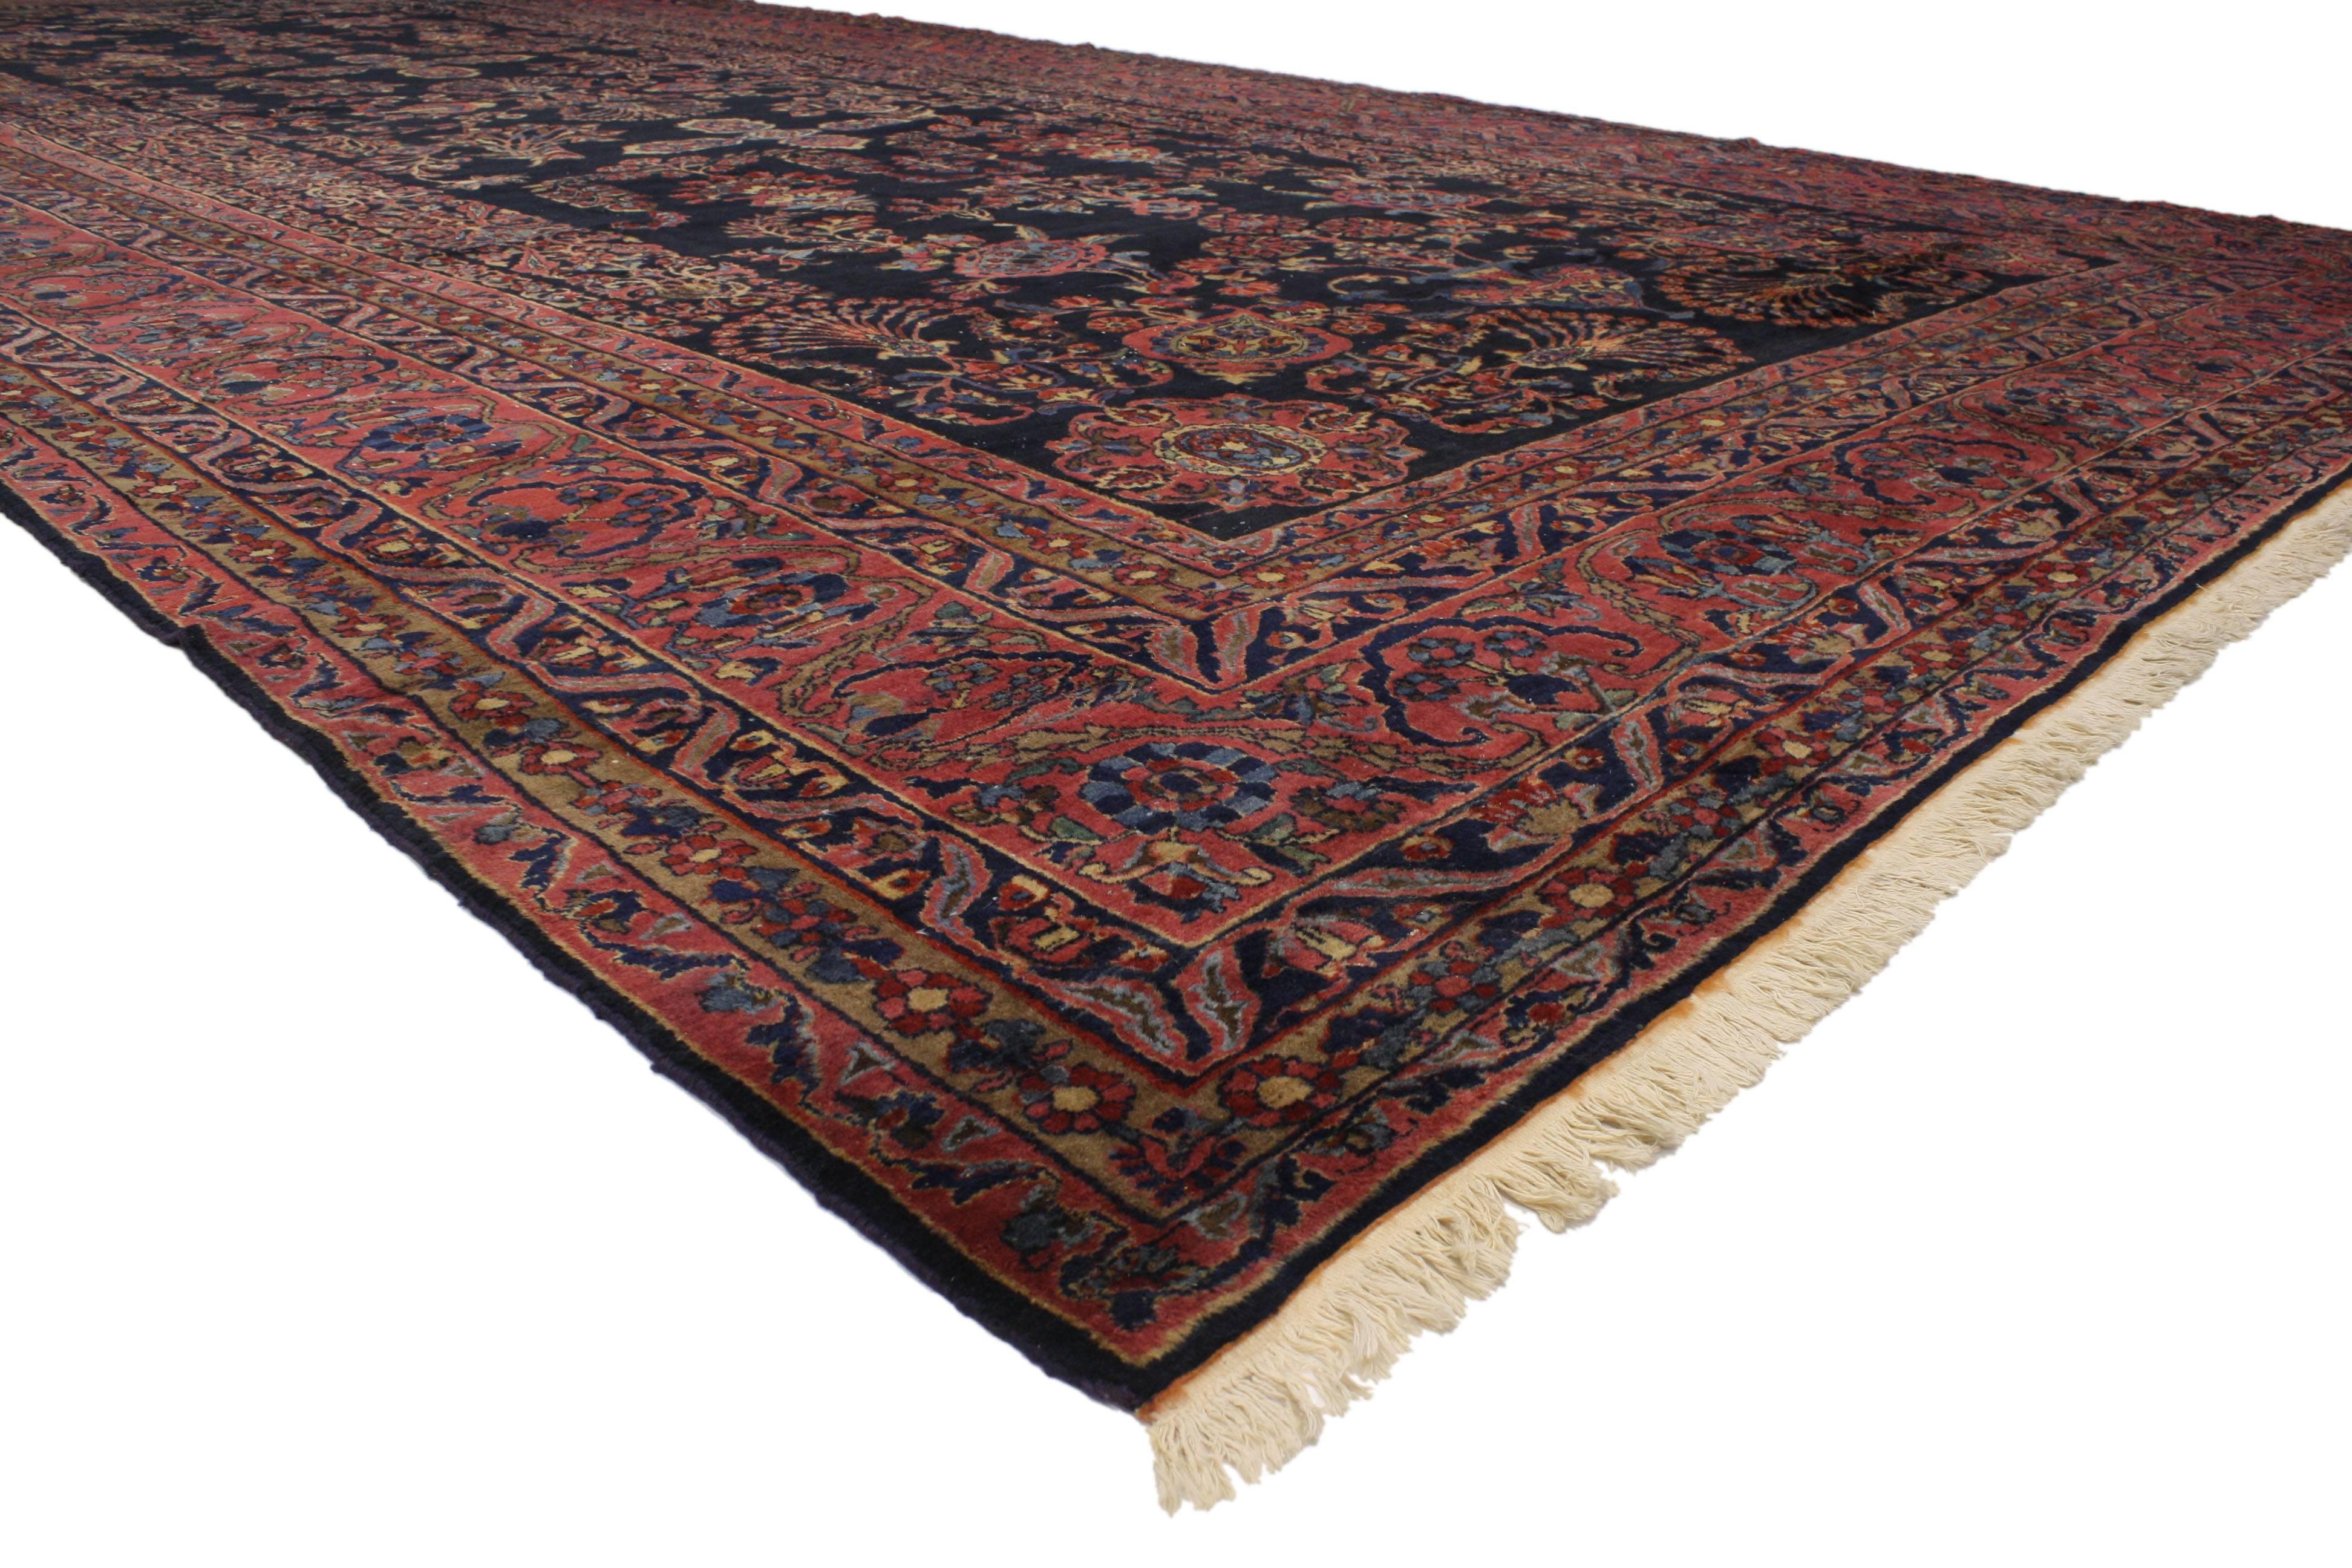 76984 Antique Persian Sarouk Rug with Victorian Renaissance Style 12'00 x 25'00. Rich in color with beguiling beauty, this hand knotted wool antique Persian Sarouk palace rug beautifully embodies Victorian Renaissance style. The abrashed midnight